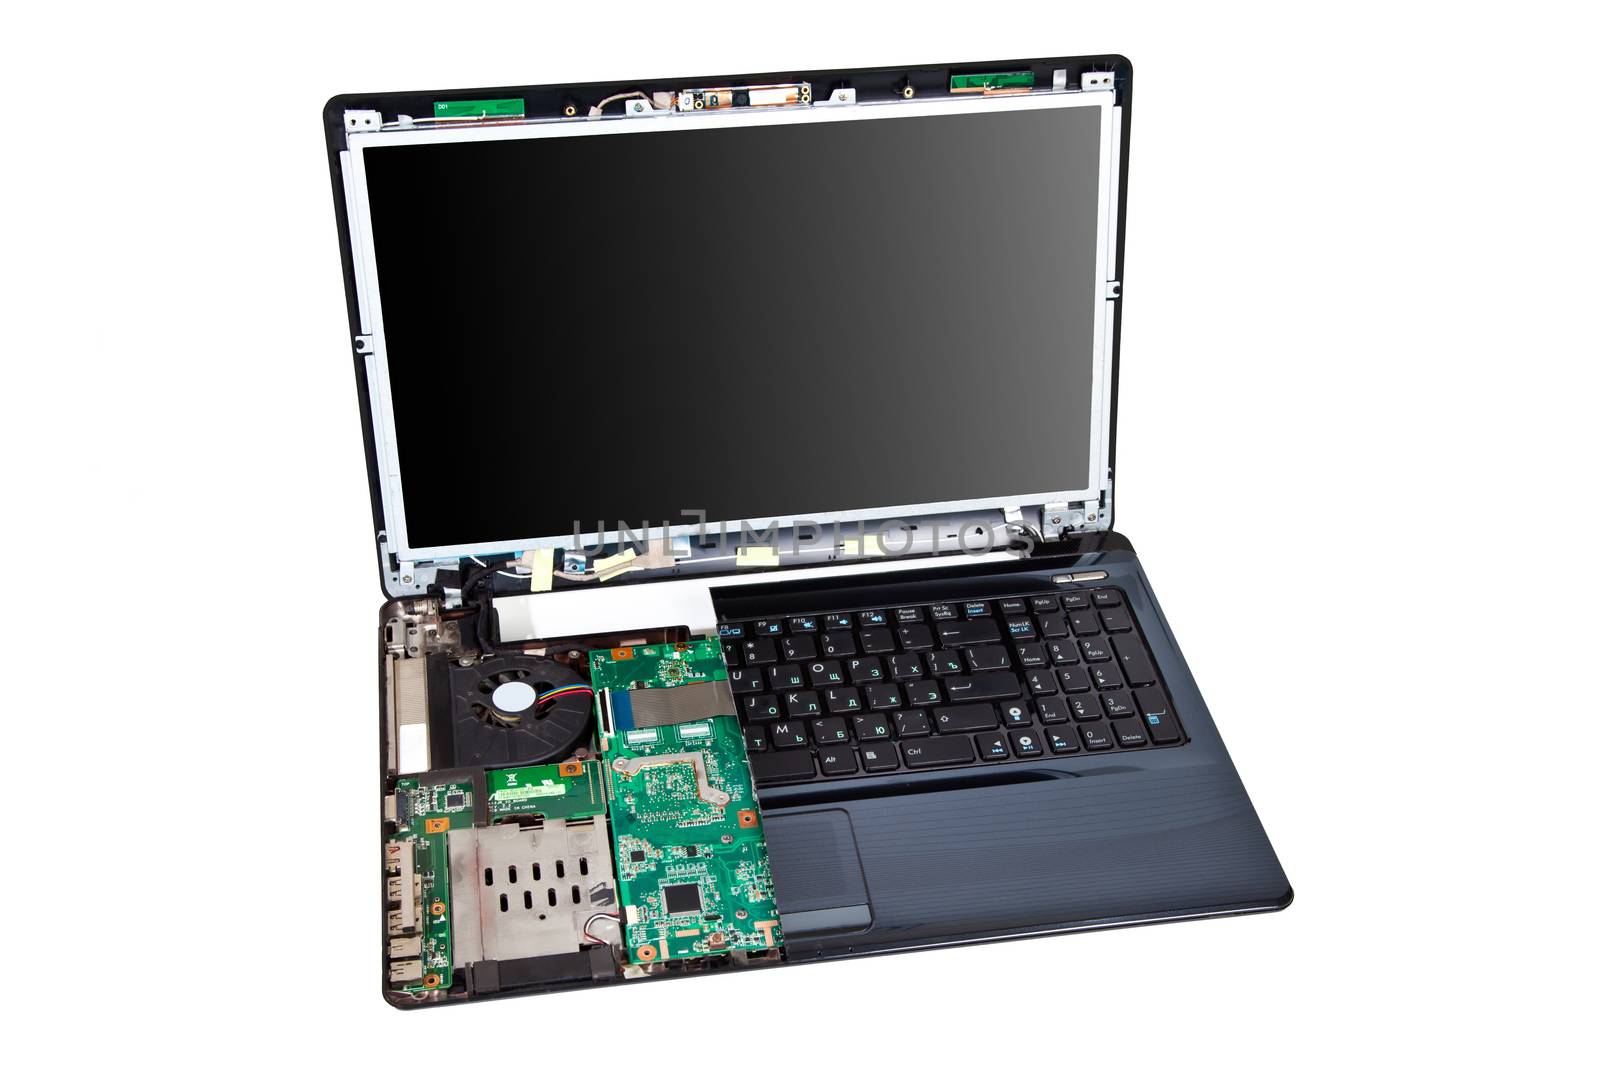 Laptop half disassembled. Repair service concept by RawGroup